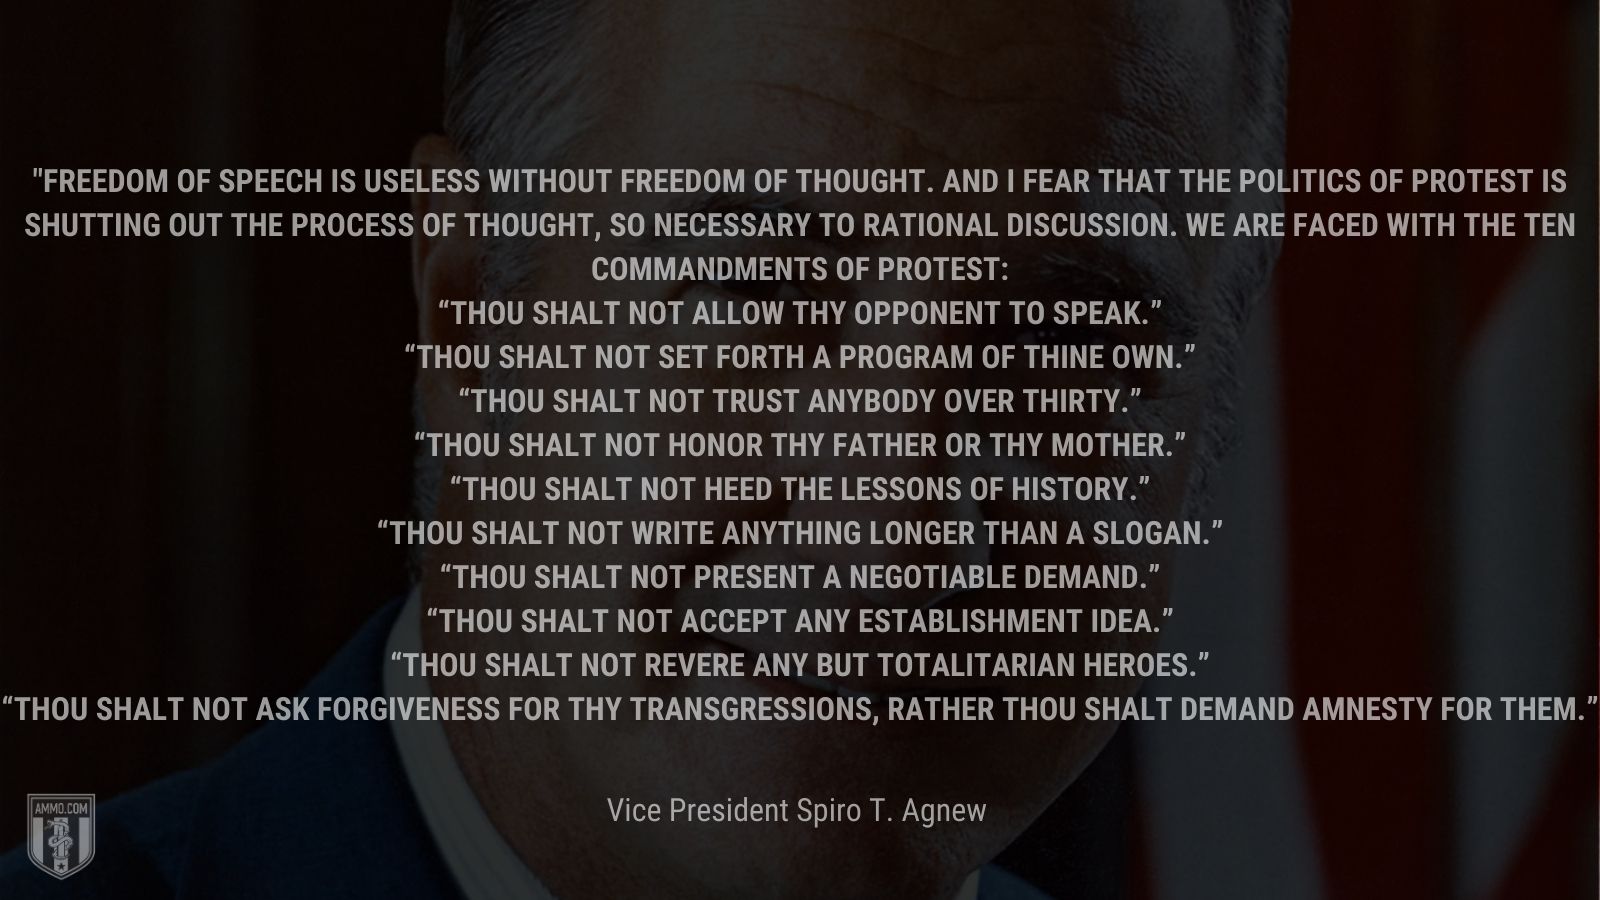 “Freedom of speech is useless without freedom of thought. And I fear that the politics of protest is shutting out the process of thought, so necessary to rational discussion. We are faced with the Ten Commandments of Protest” - Vice President Spiro T. Agnew